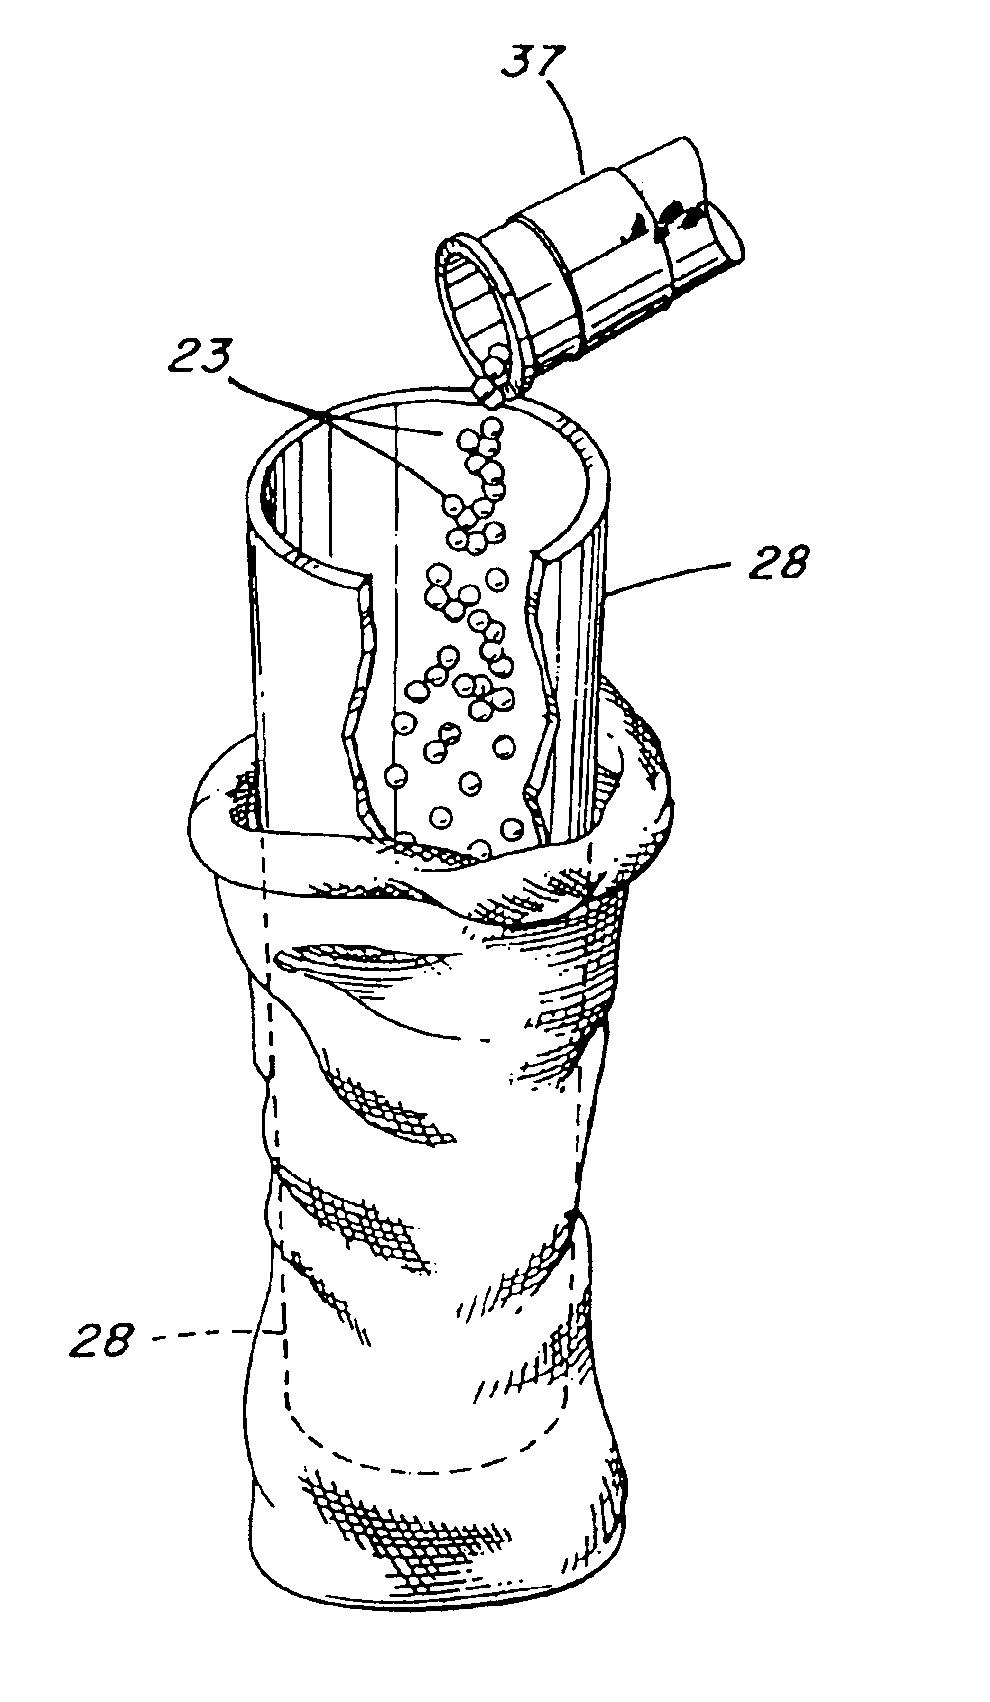 Method for producing a less lethal projectile